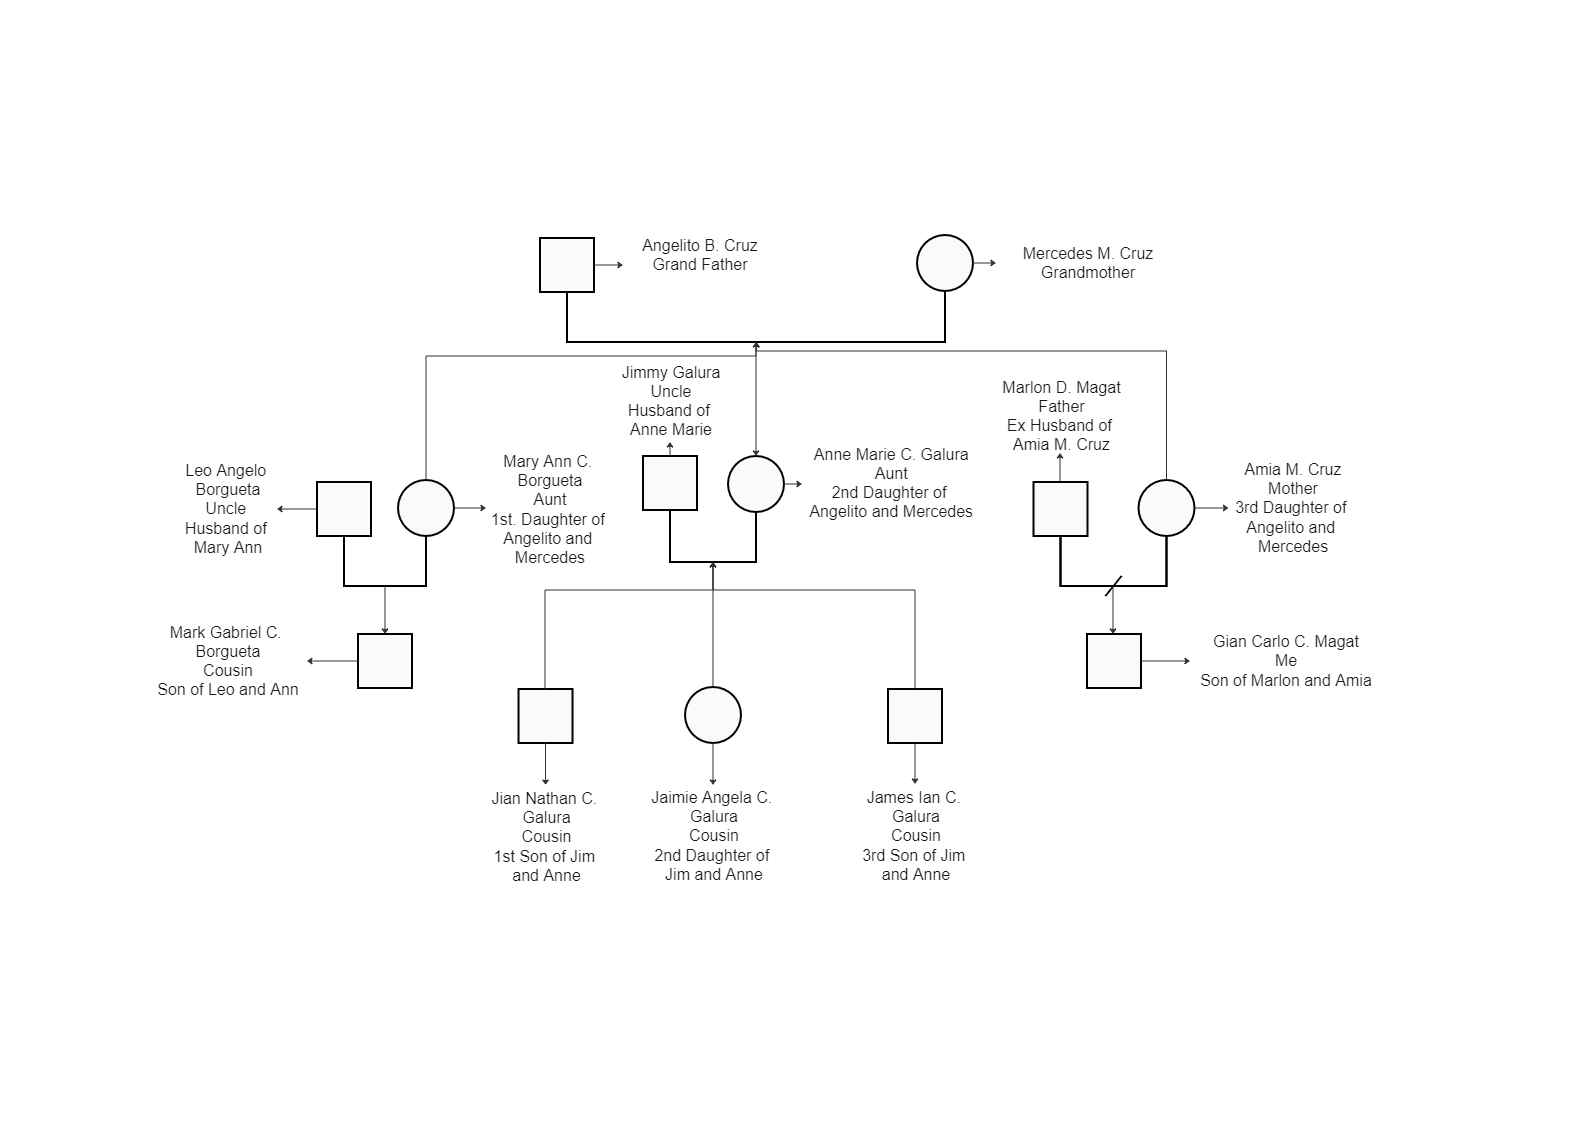 James Genogram below is a very detailed diagram featuring multiple generations. In the beginning, we see how Angelito Cruz married Mercedes Cruz and gave birth to Mary Ann, Anne Marie, and Amia Cruz. Anne Marrie married Jimmy Galura, and the couple gave b